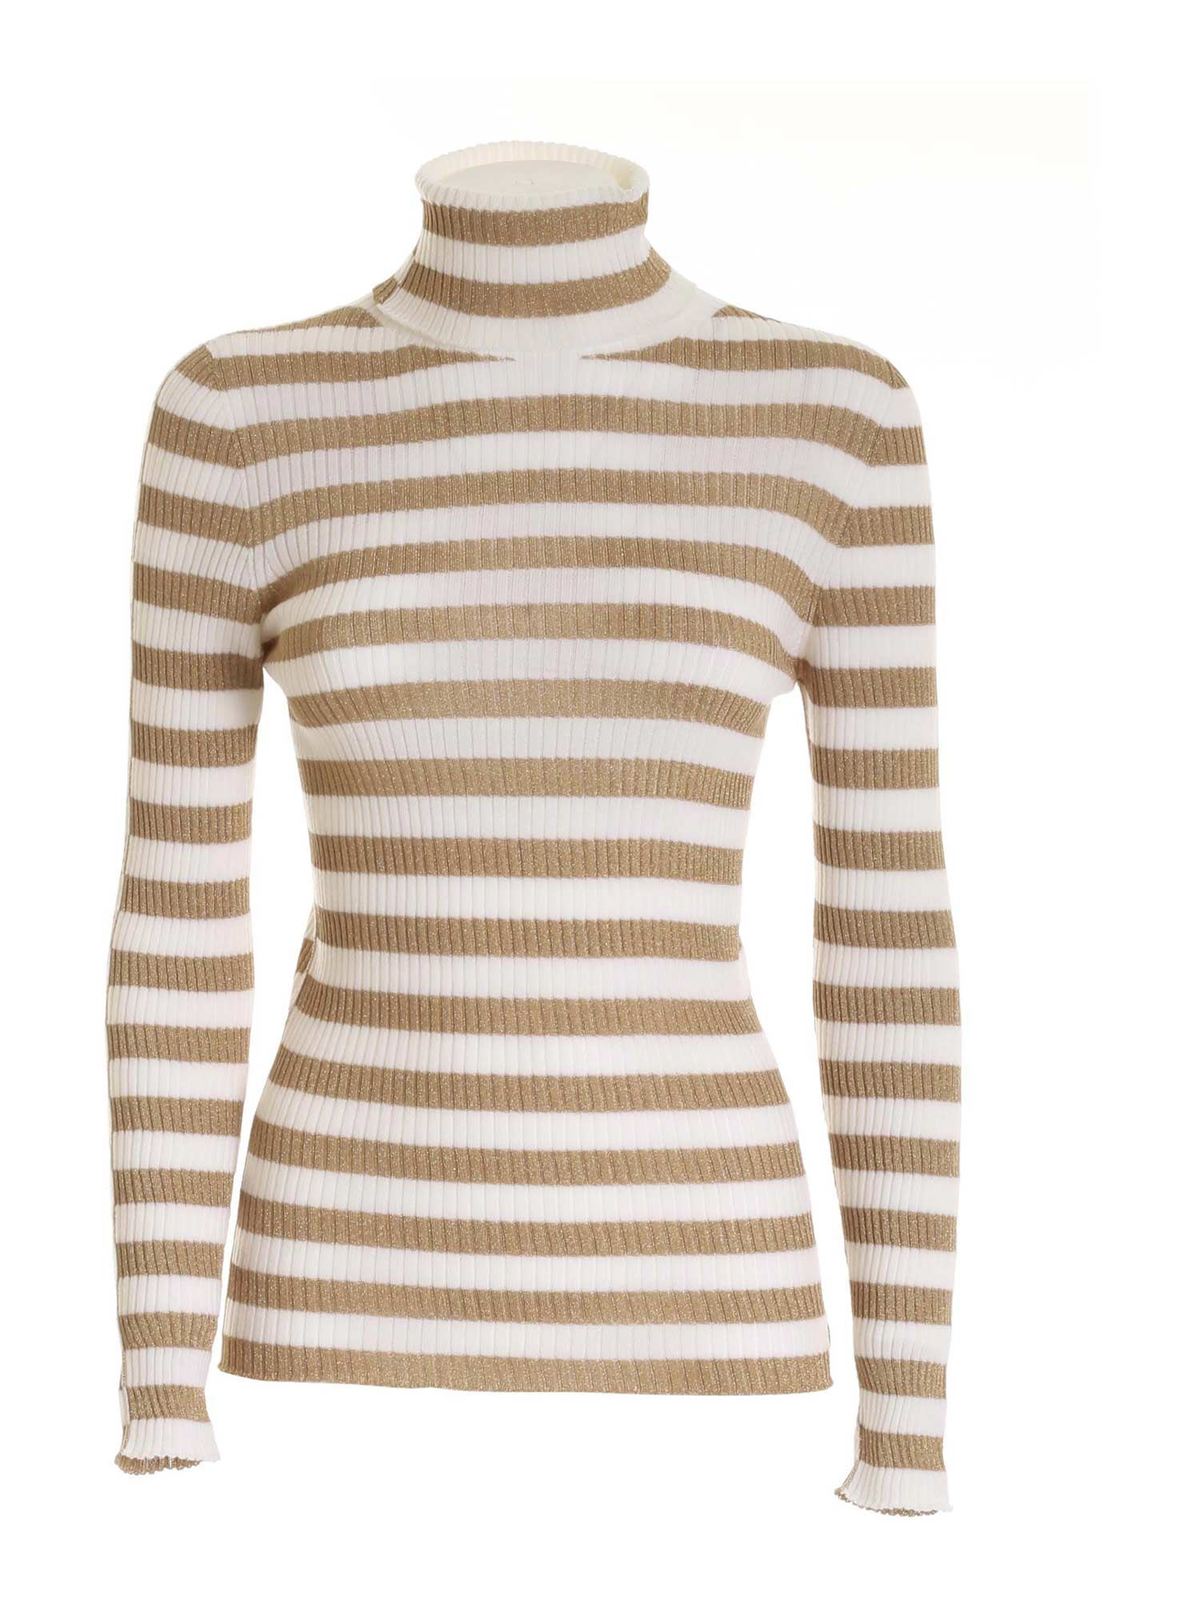 Twinset - Striped turtleneck in cream and gold color - Turtlenecks ...